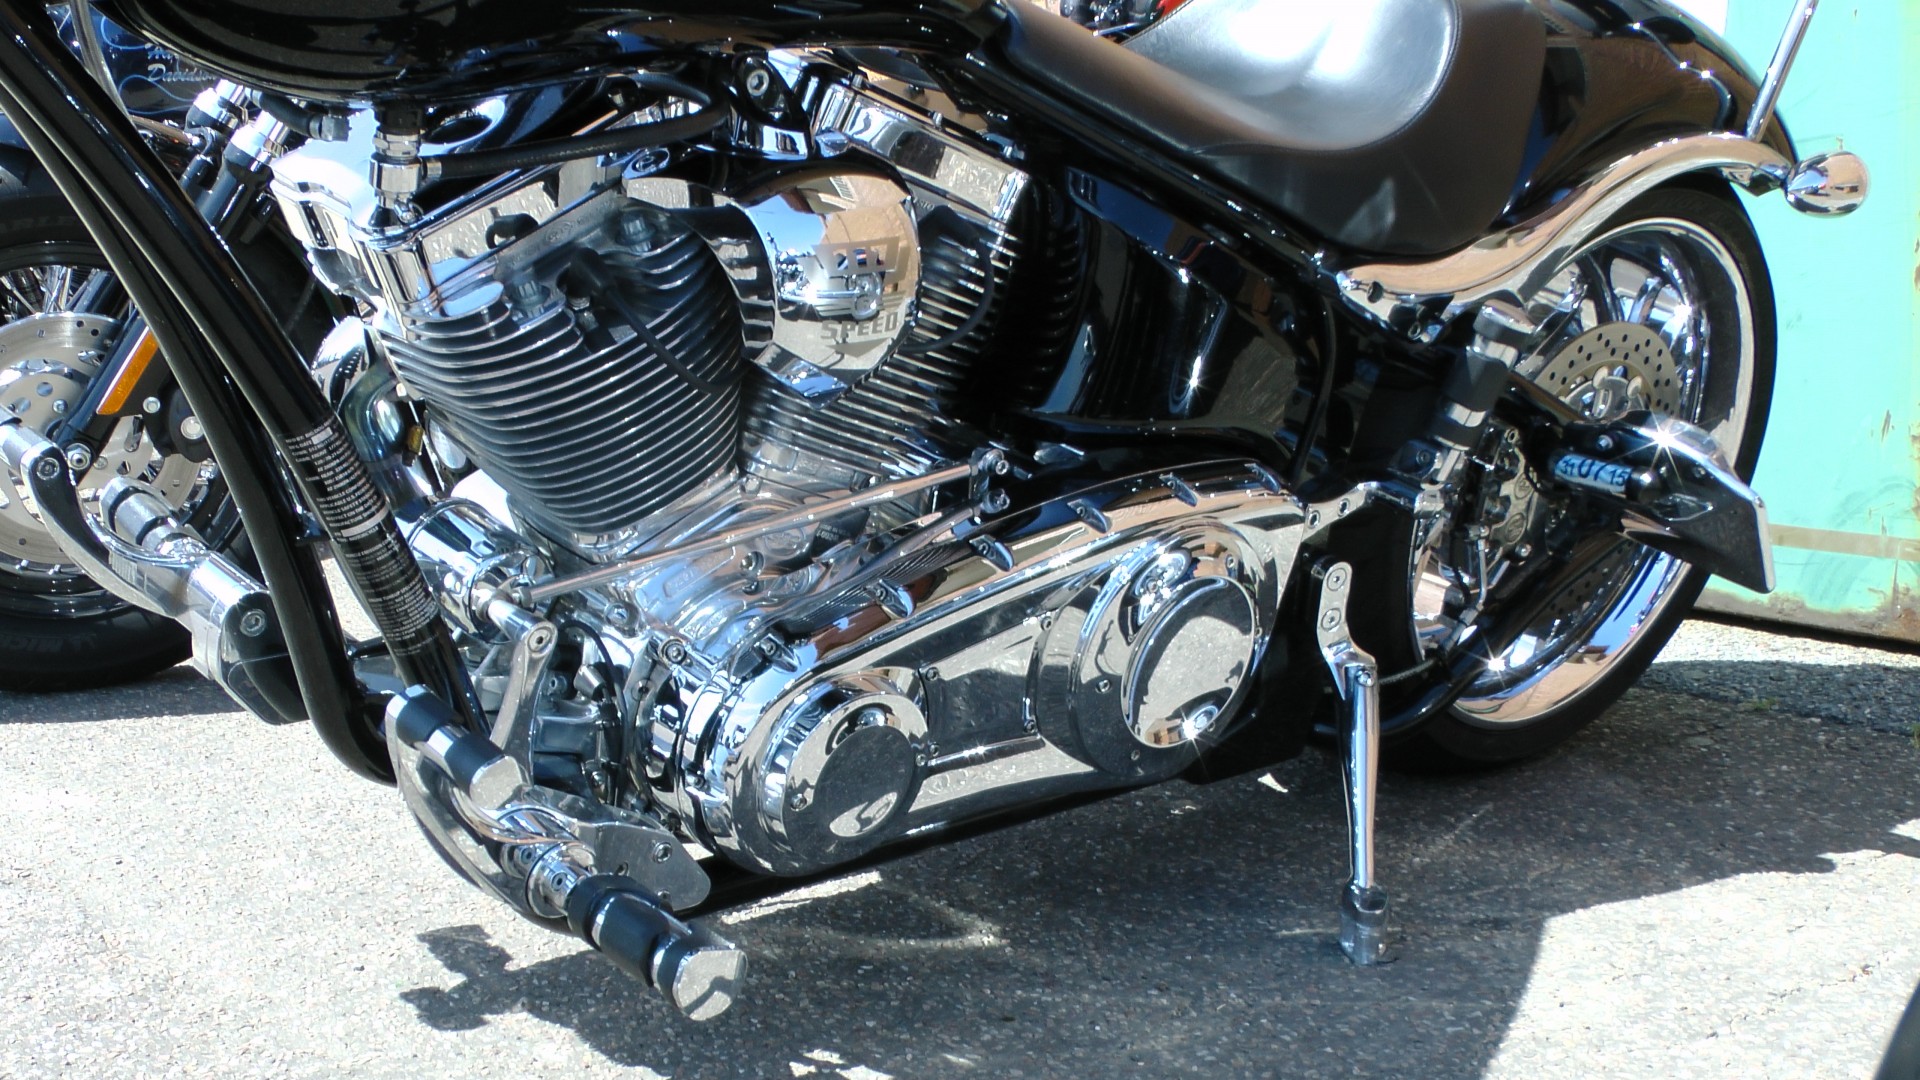 motorcycle exhaust pipe pipes chrome chromed free photo